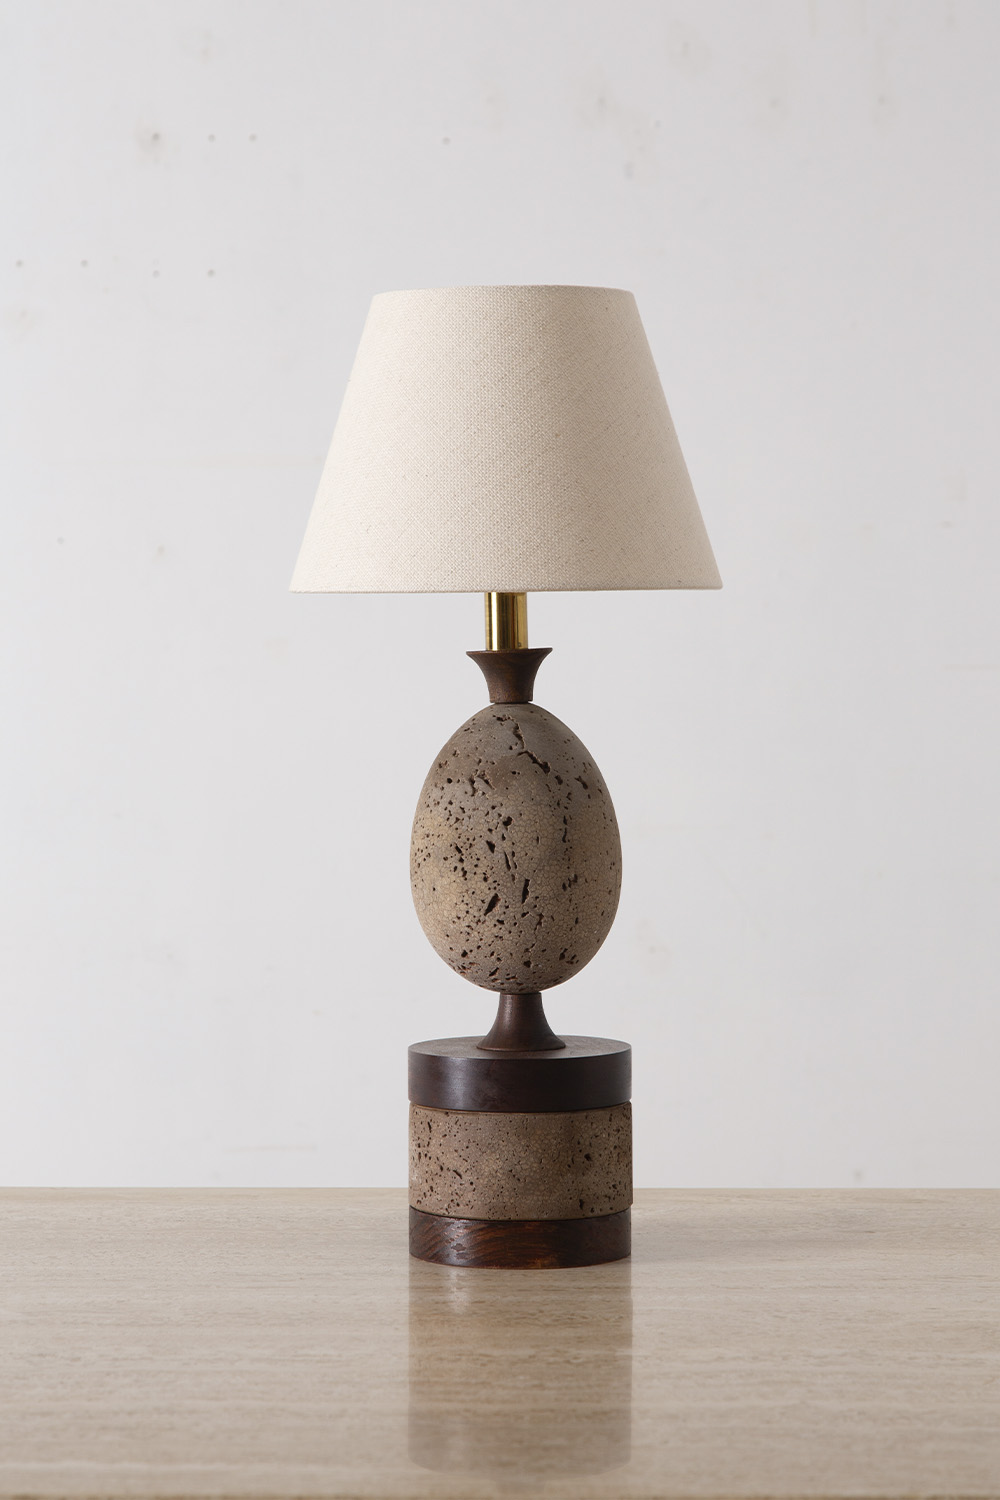 Vintage Desk Lamp in Travertine and Wood